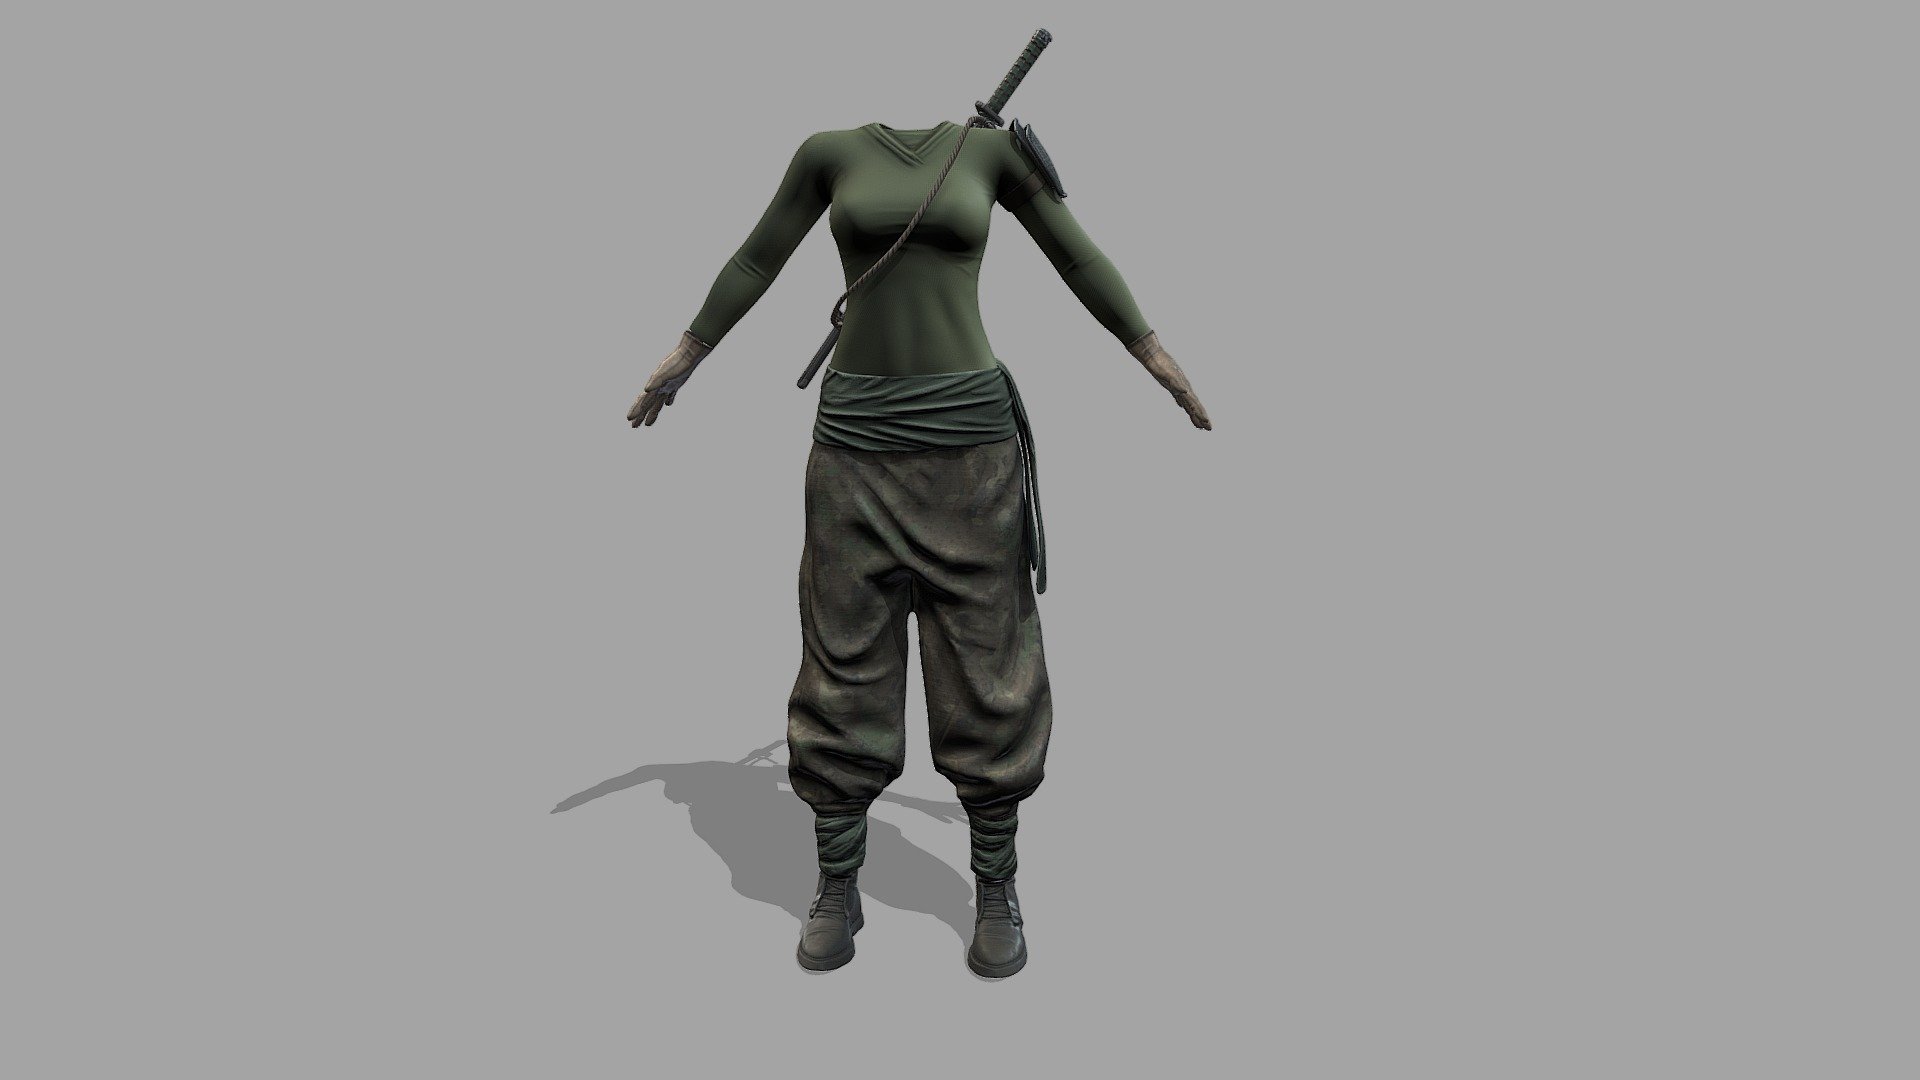 Top + Sword + Pants + Boots + Gloves

Can be fitted to any character

Clean topology

No overlapping smart optimum unwrapped UVs

4K High-quality realistic textures

FBX, OBJ, gITF, USDZ (request other formats)

PBR or Classic

Please ask any other questions.

Type     user:3dia &ldquo;search term